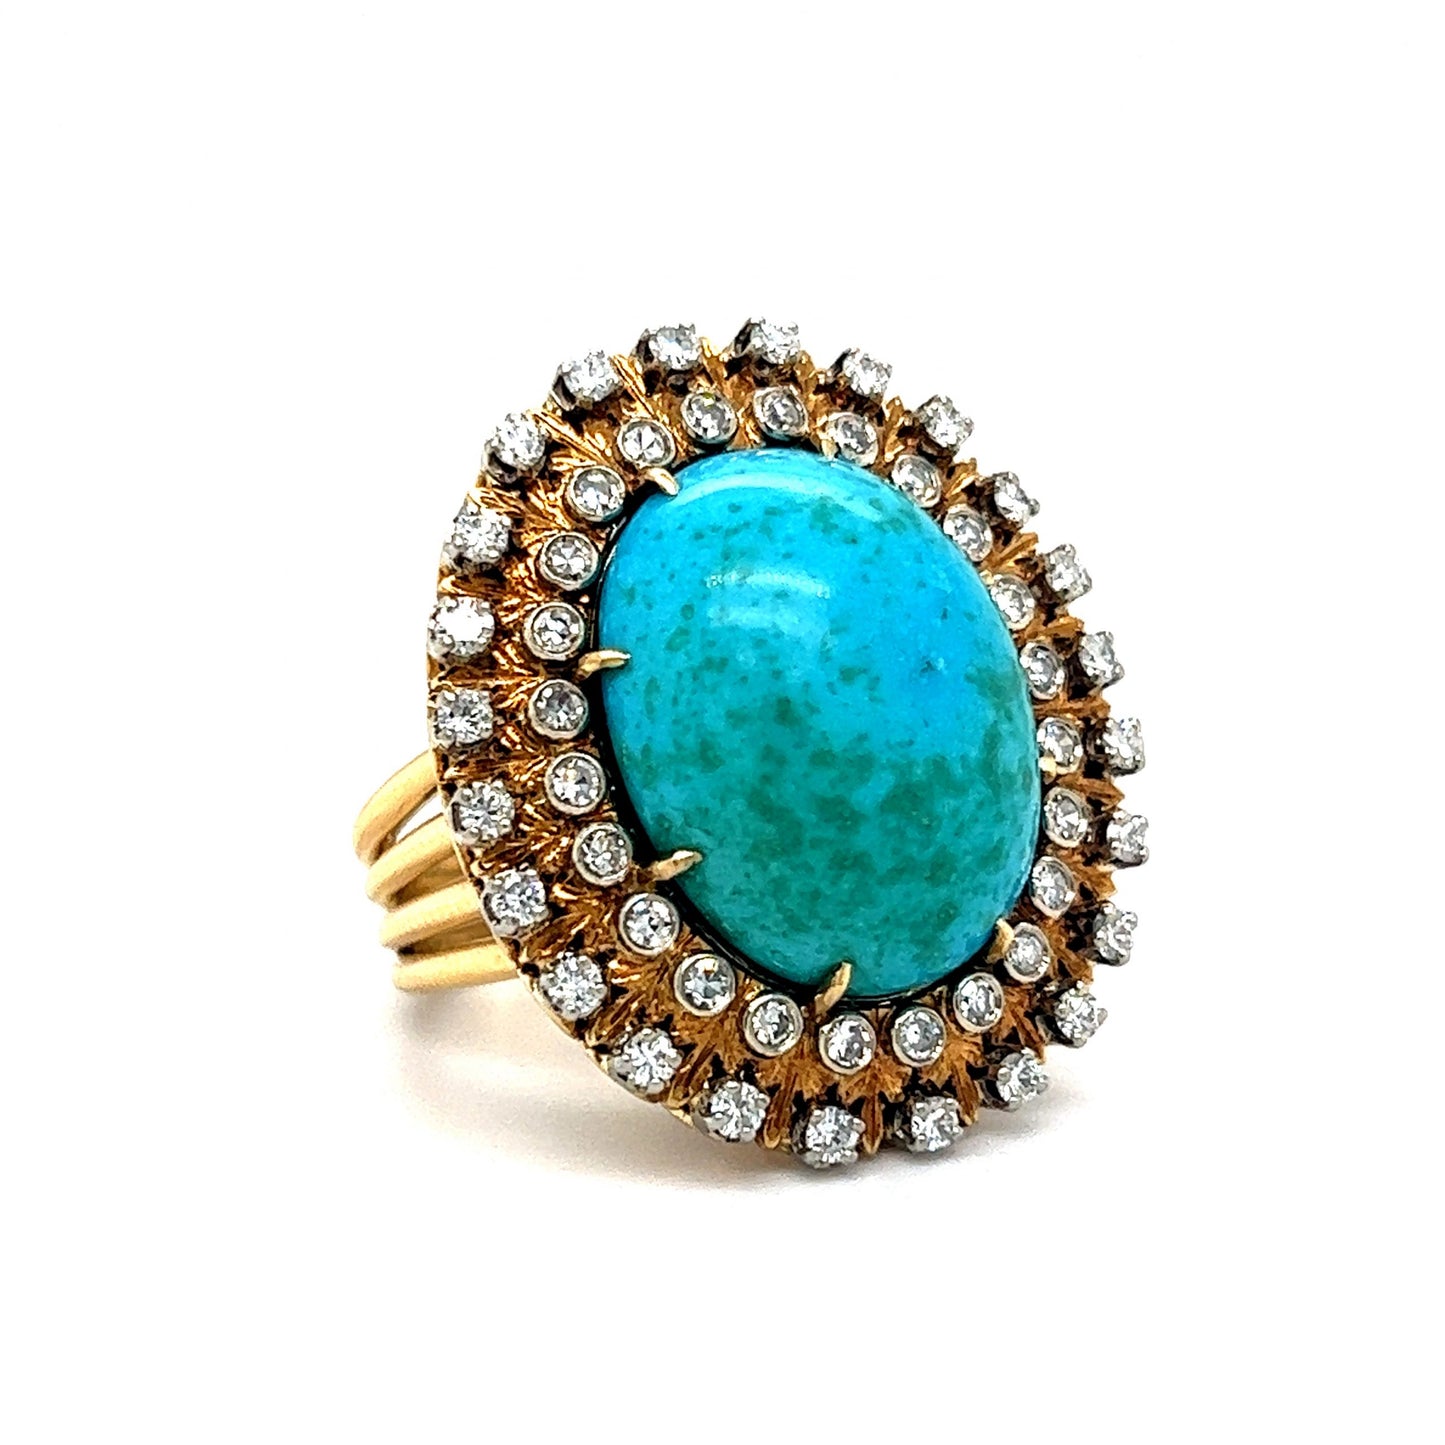 Vintage Double Diamond Halo Turquoise Ring in 18k Yellow Gold